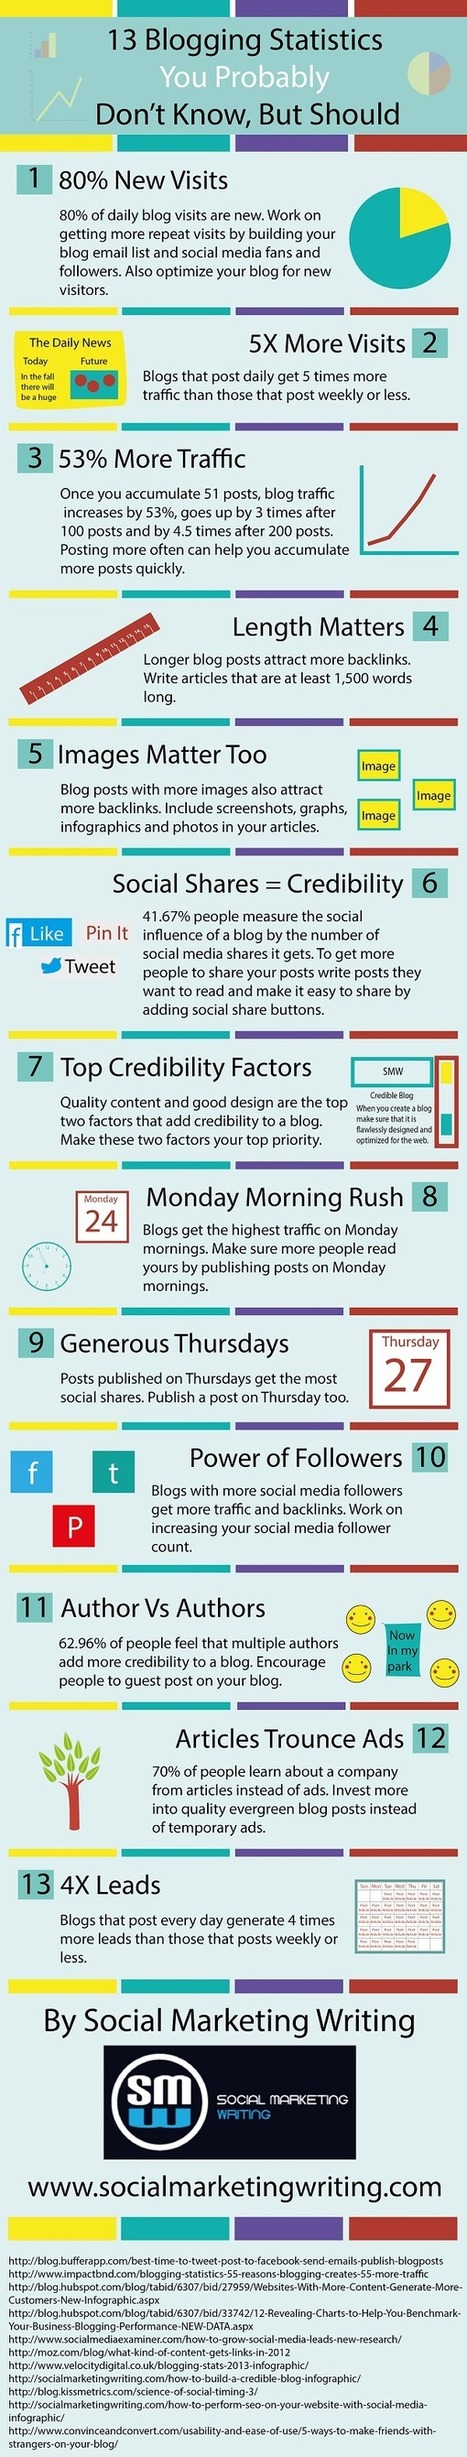 13 Blogging Statistics You Probably Don’t Know, But Should [Infographic] | 21st Century Learning and Teaching | Scoop.it